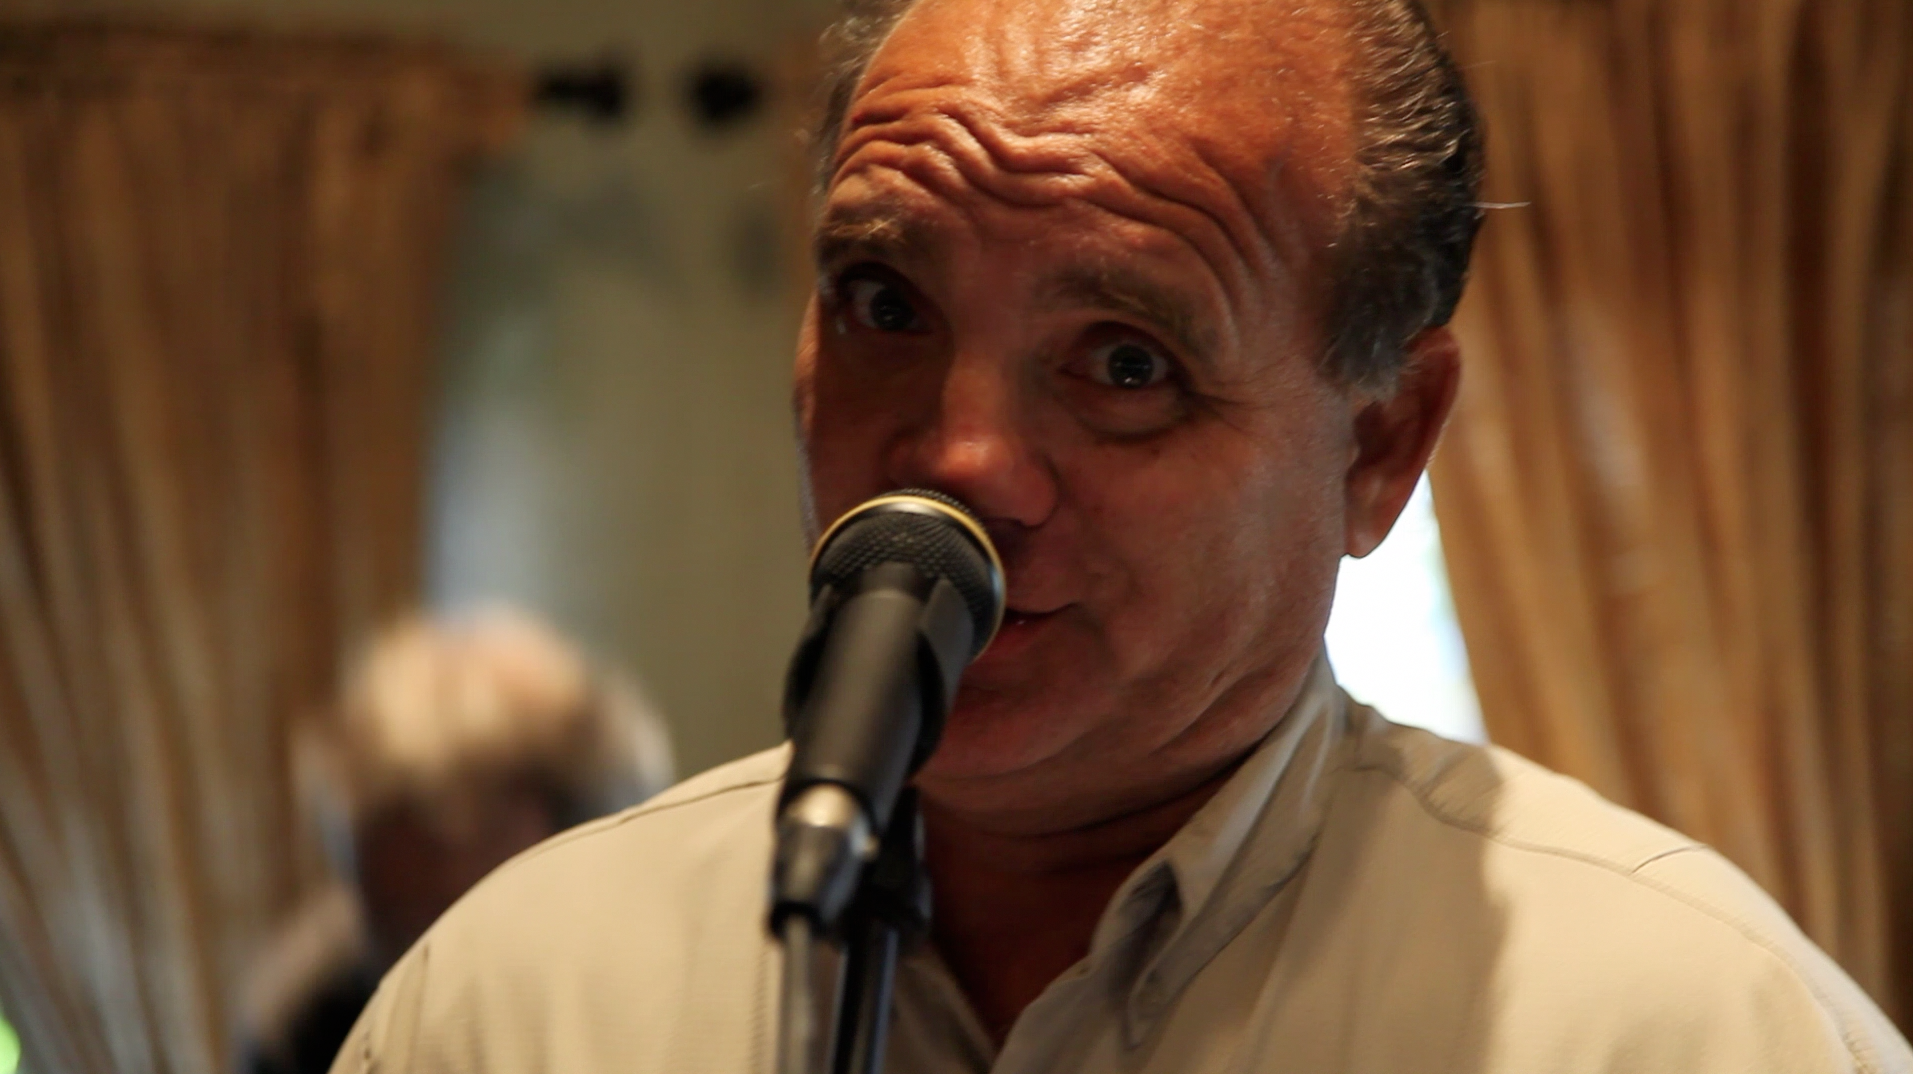 Alfredo at the Clockwork performance during the 94th Aero Squadron in Miami Florida on March 16, 2012